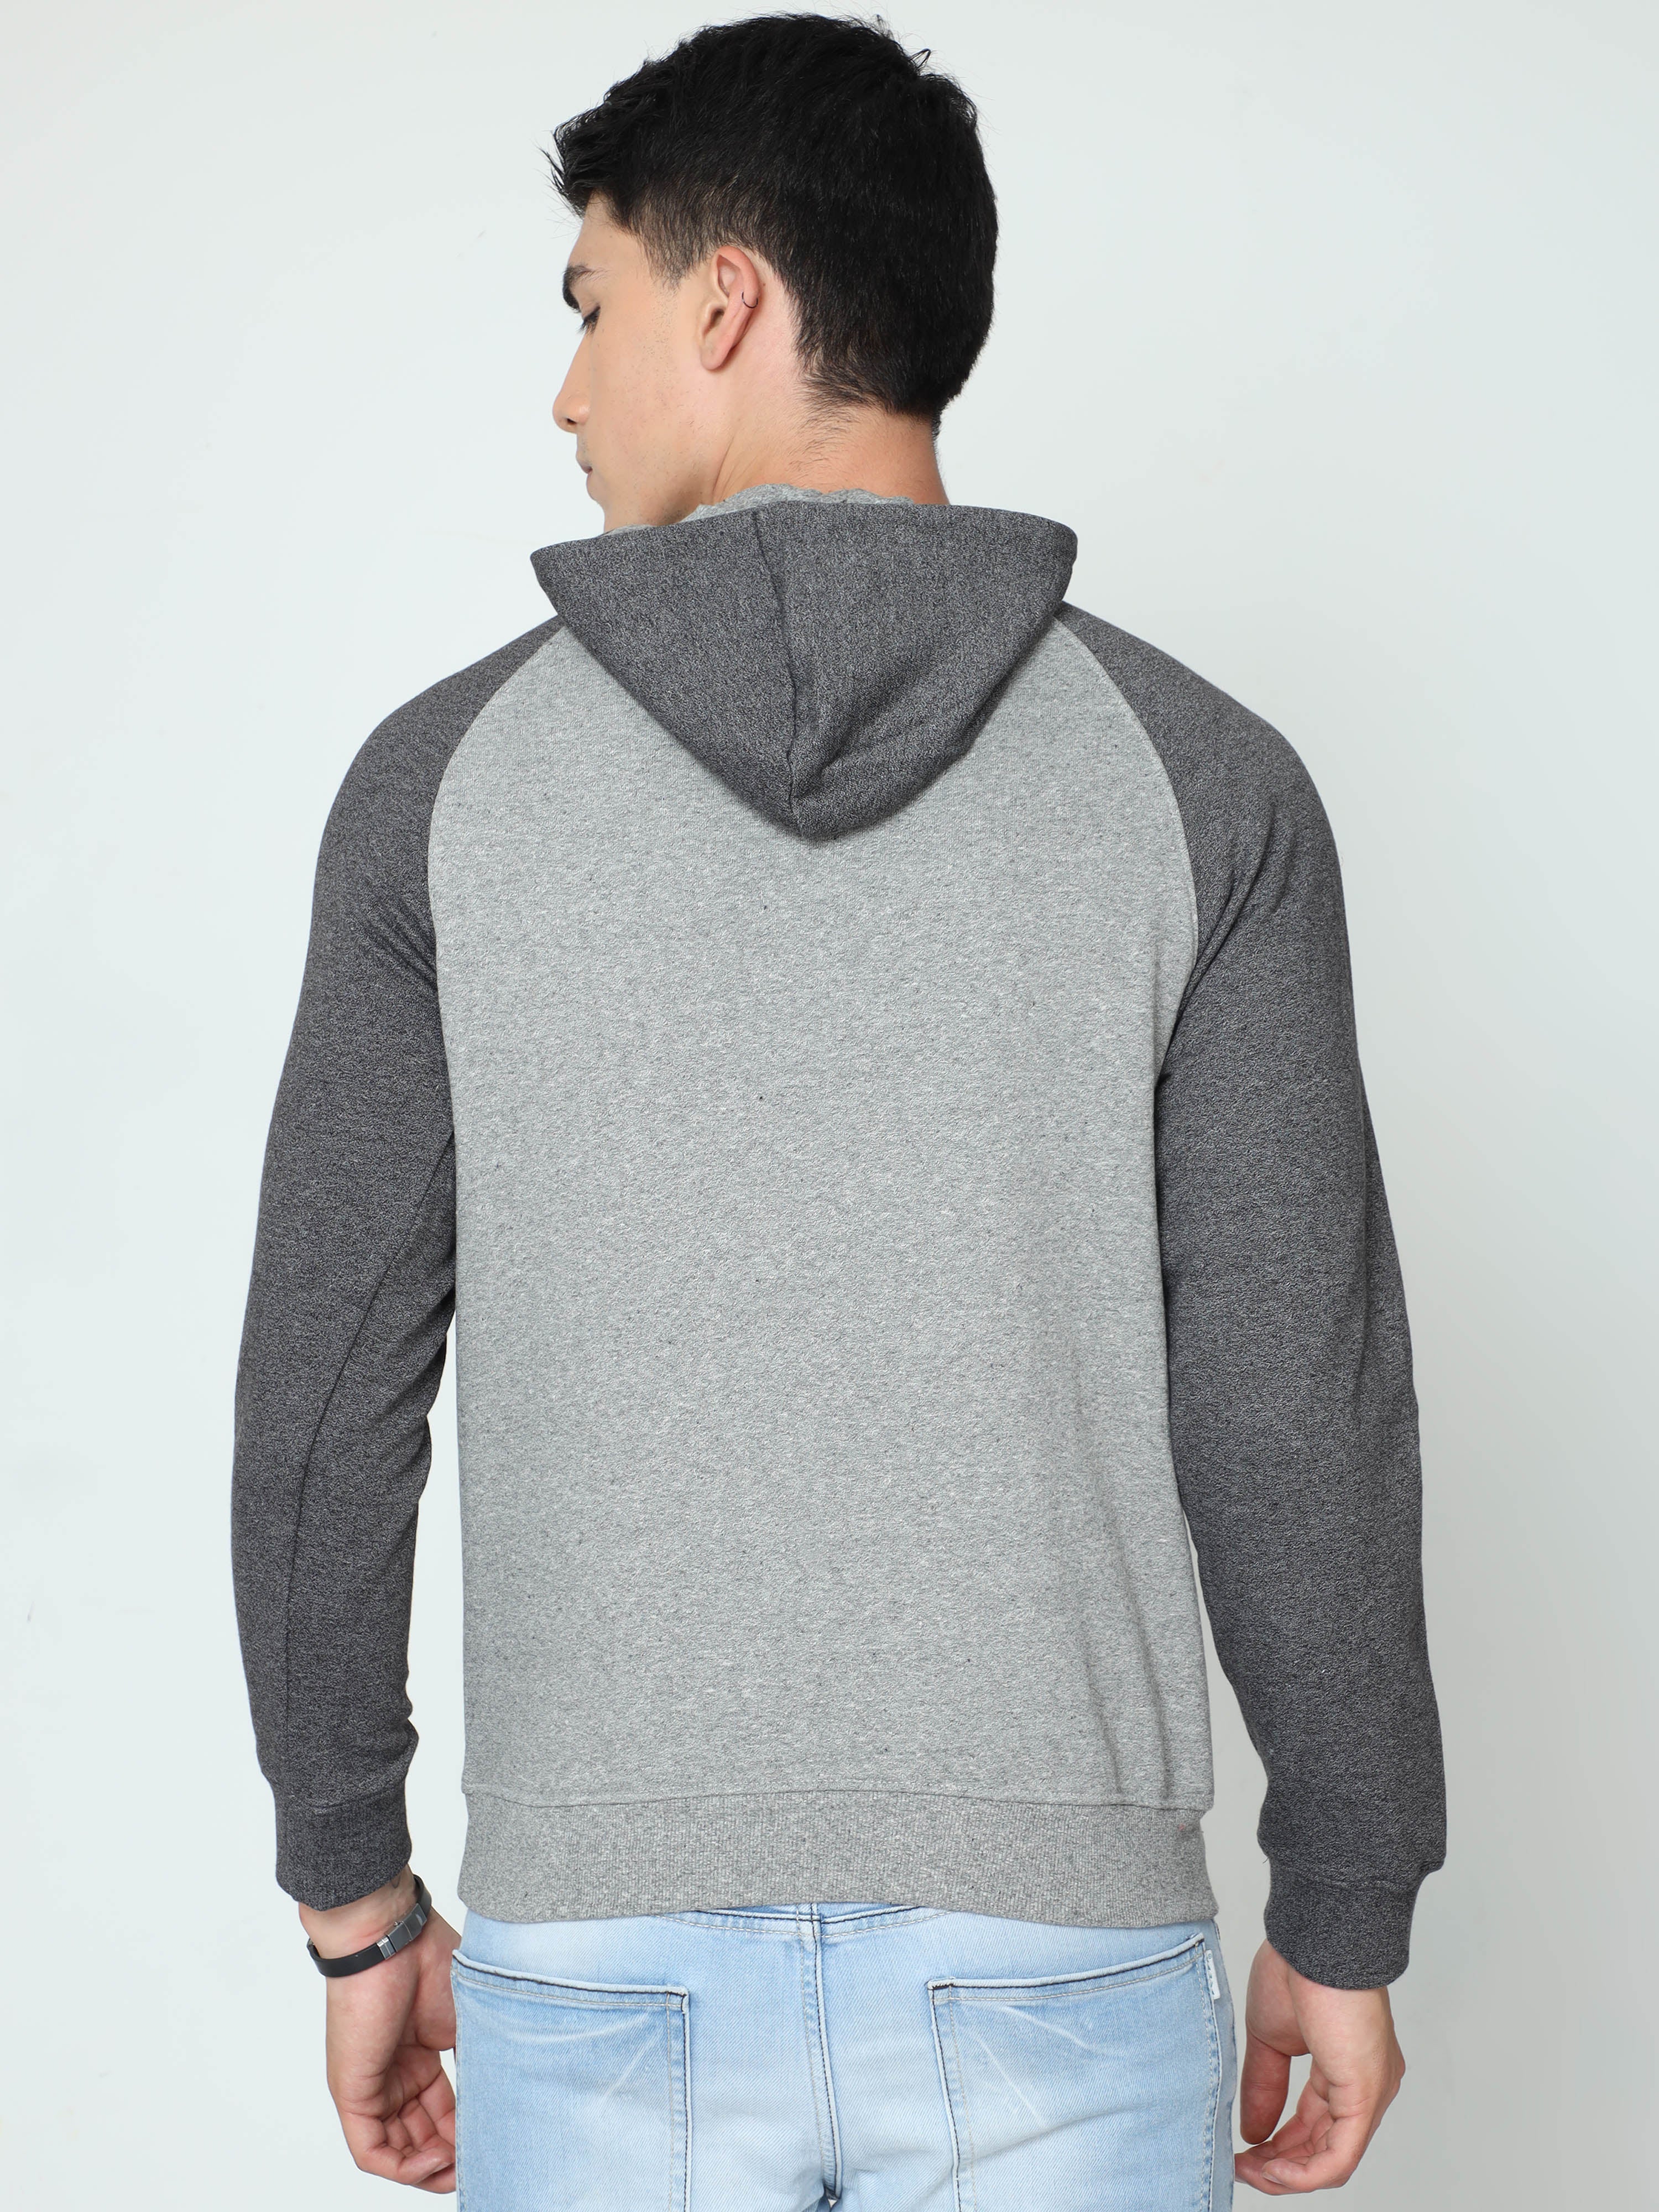 Classic Polo Mens 100% Cotton Grey Printed Crew Neck Full Sleeves Slim Fit Sweat Shirt |Cp-Ss-13